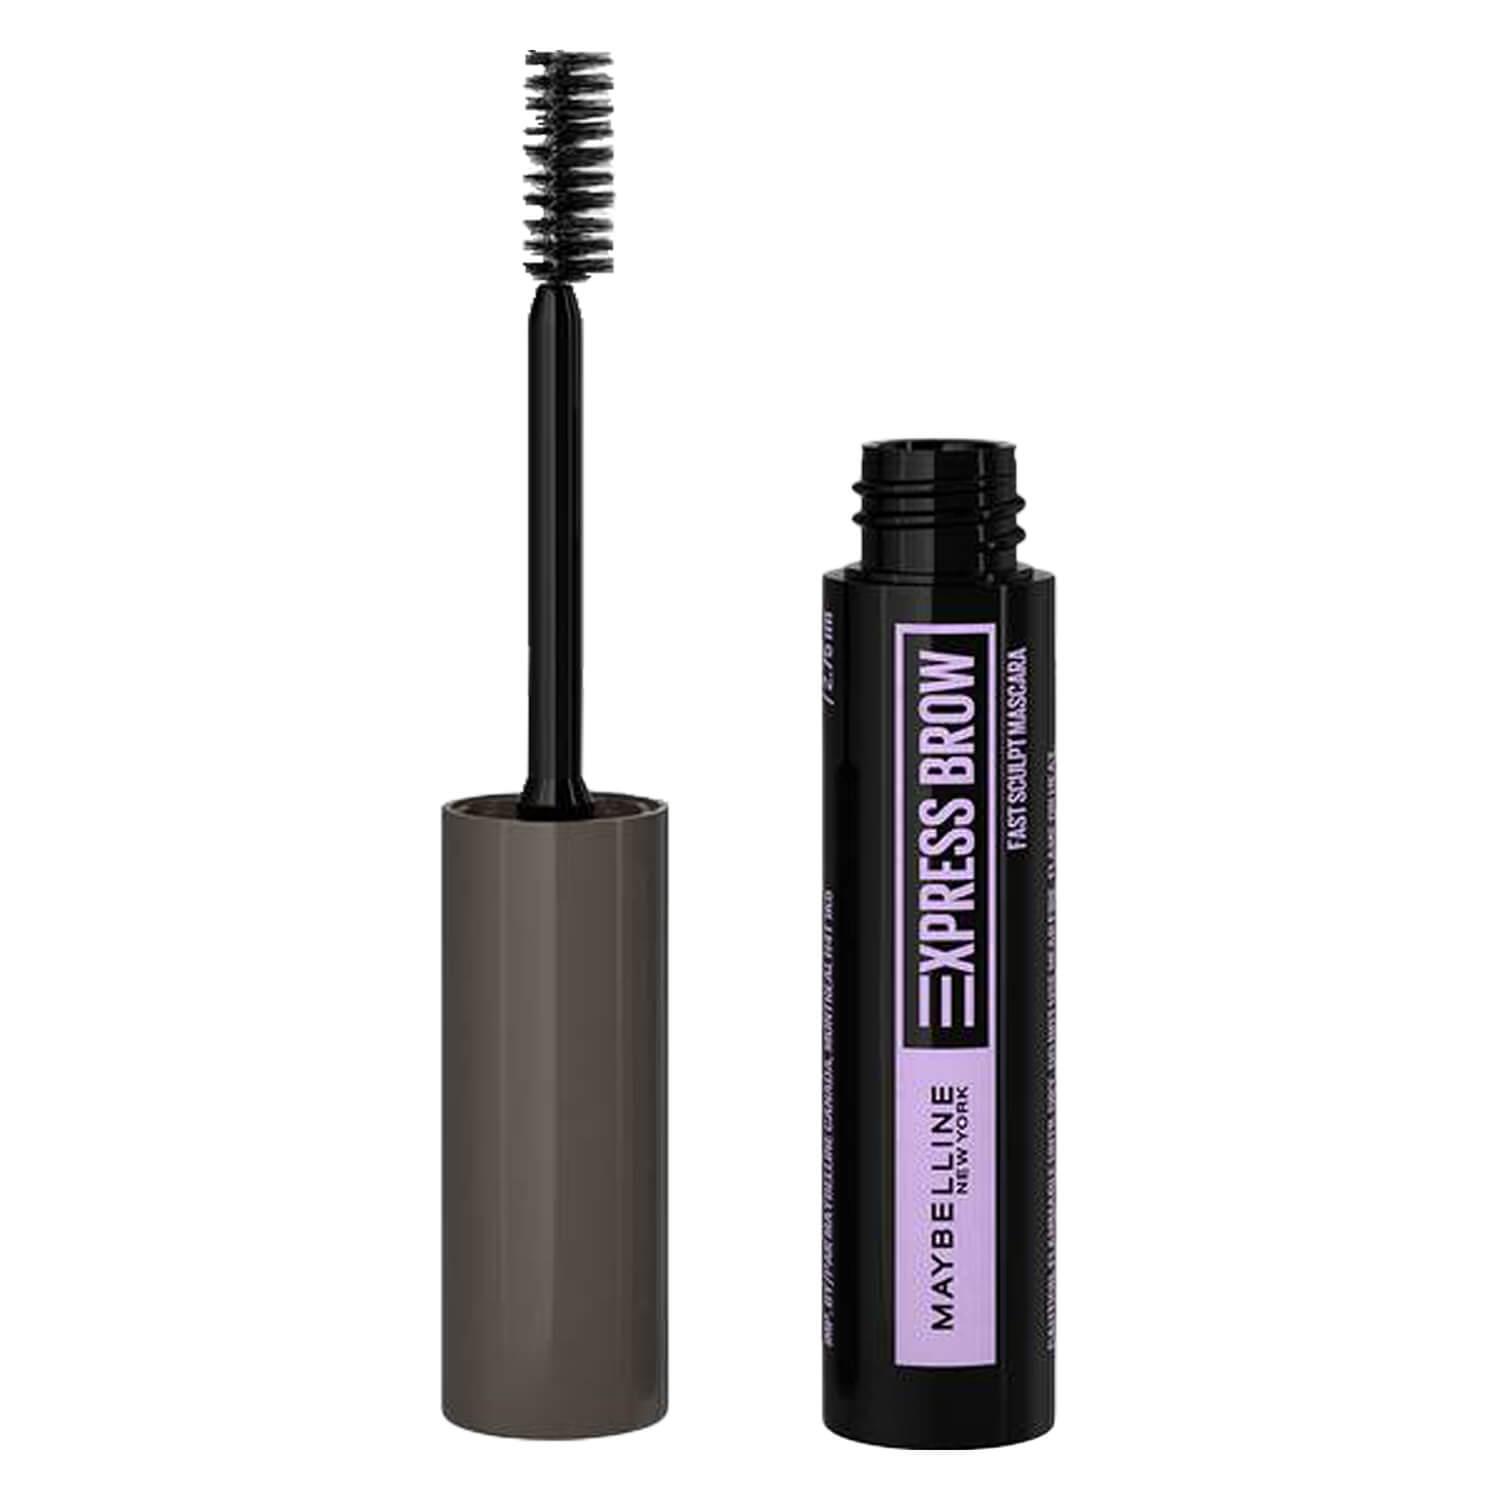 Maybelline NY Brows - Express Brow Fast Sculpt Mascara 04 Medium Brown